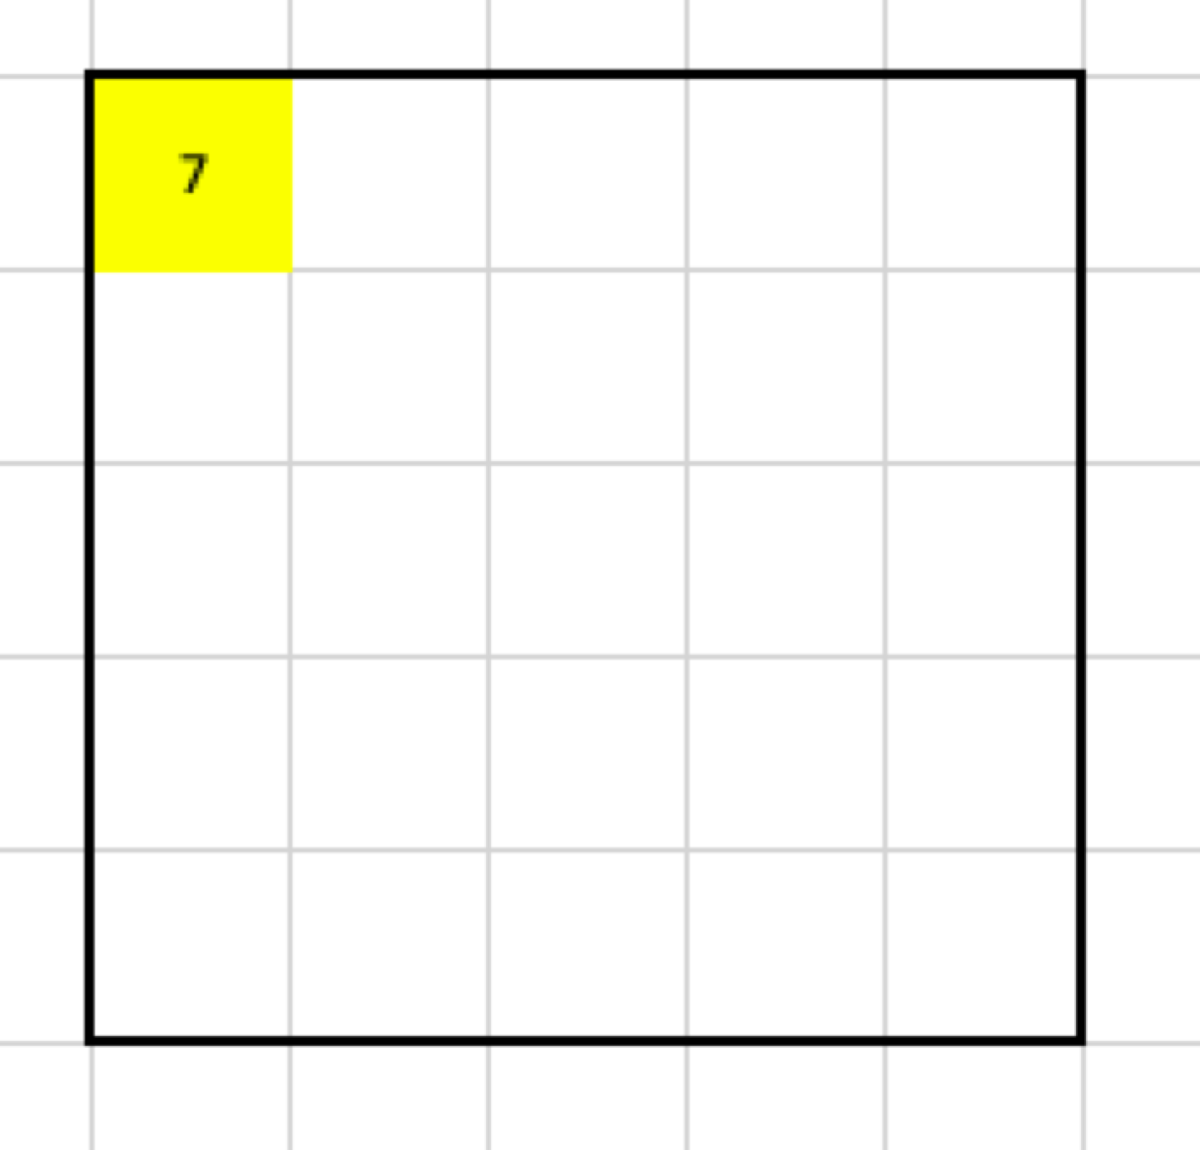 Result (after one step) of the 3x3 filter applied to the example input